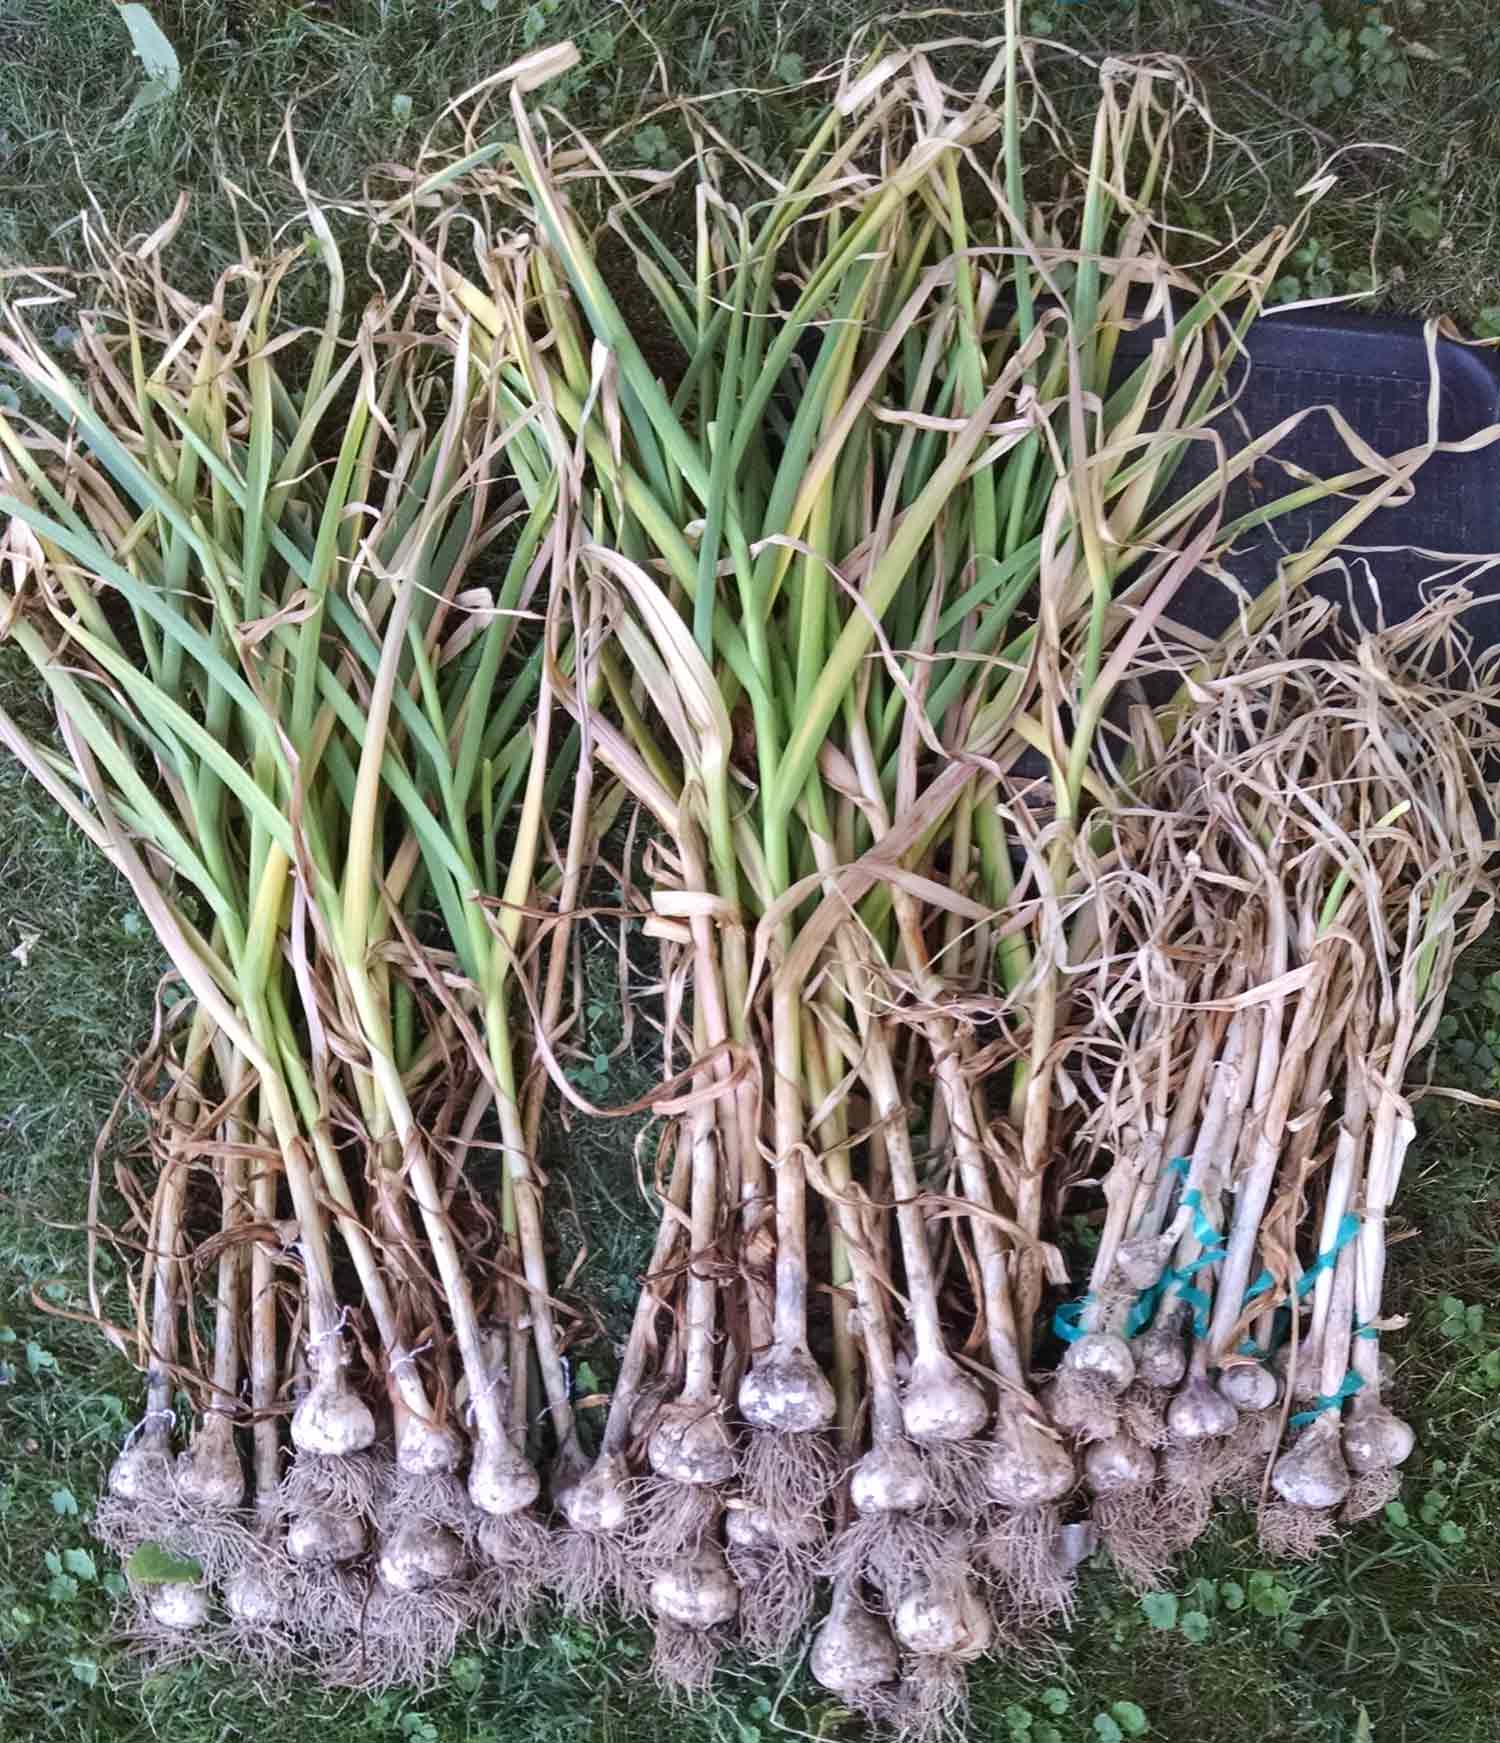 Garlic plants waiting to be cured.